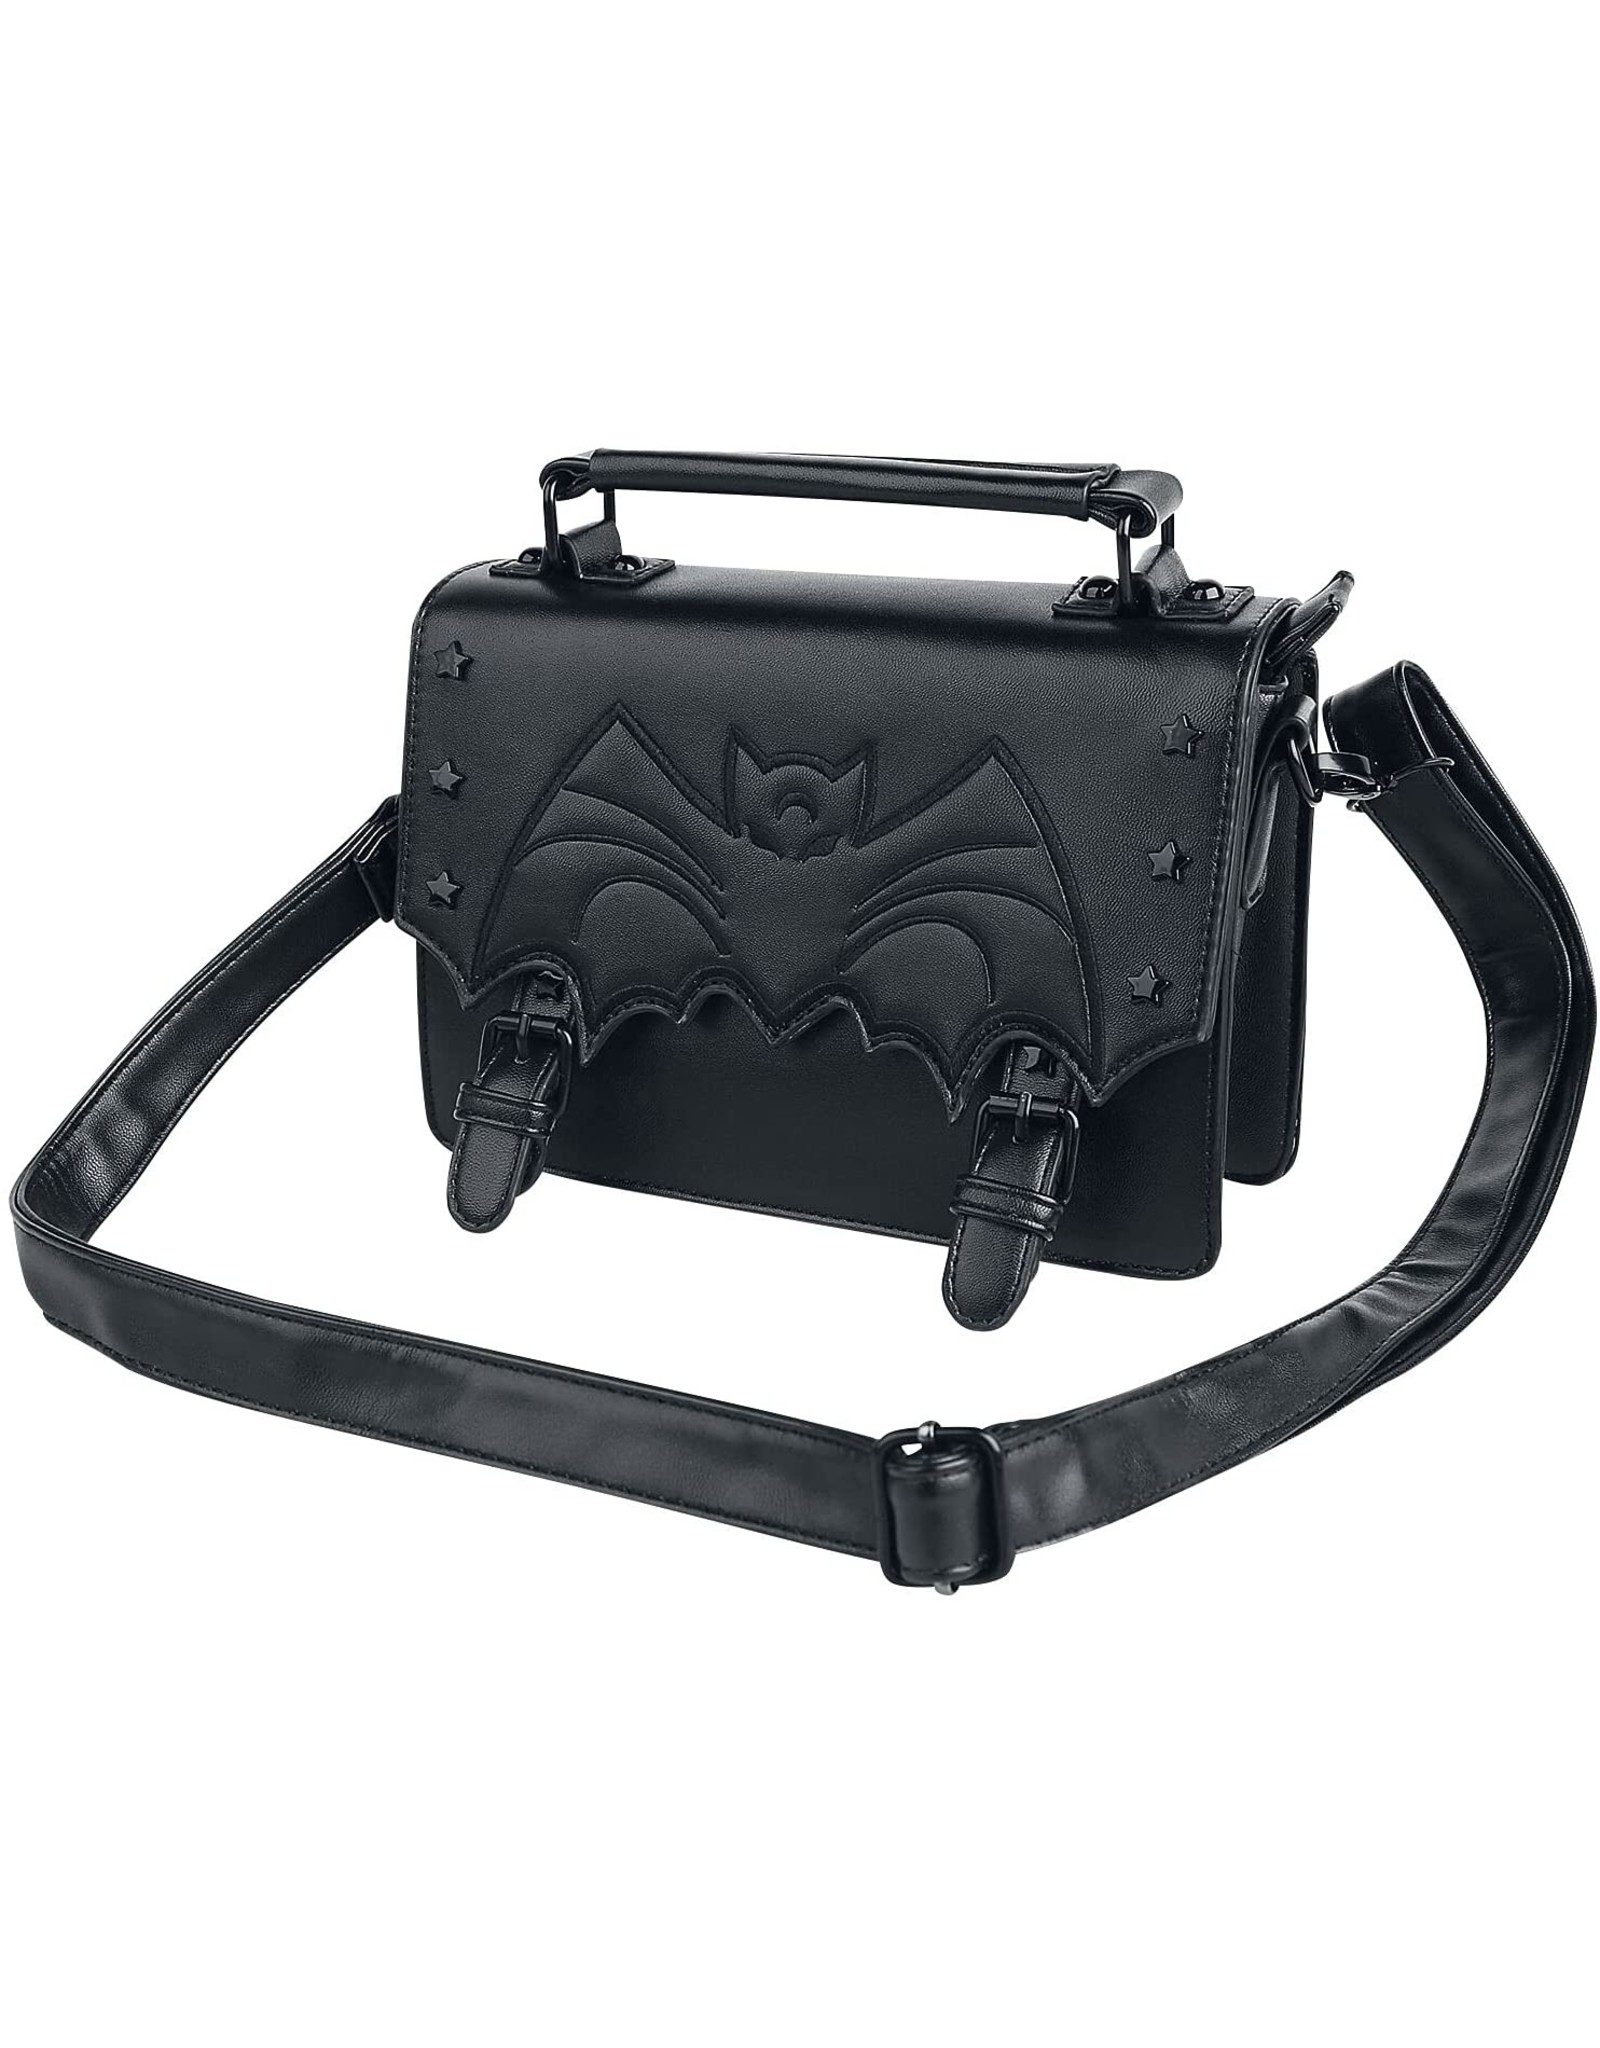 Banned Gothic bags Steampunk bags - Handbag with embossed Bat Nocturne